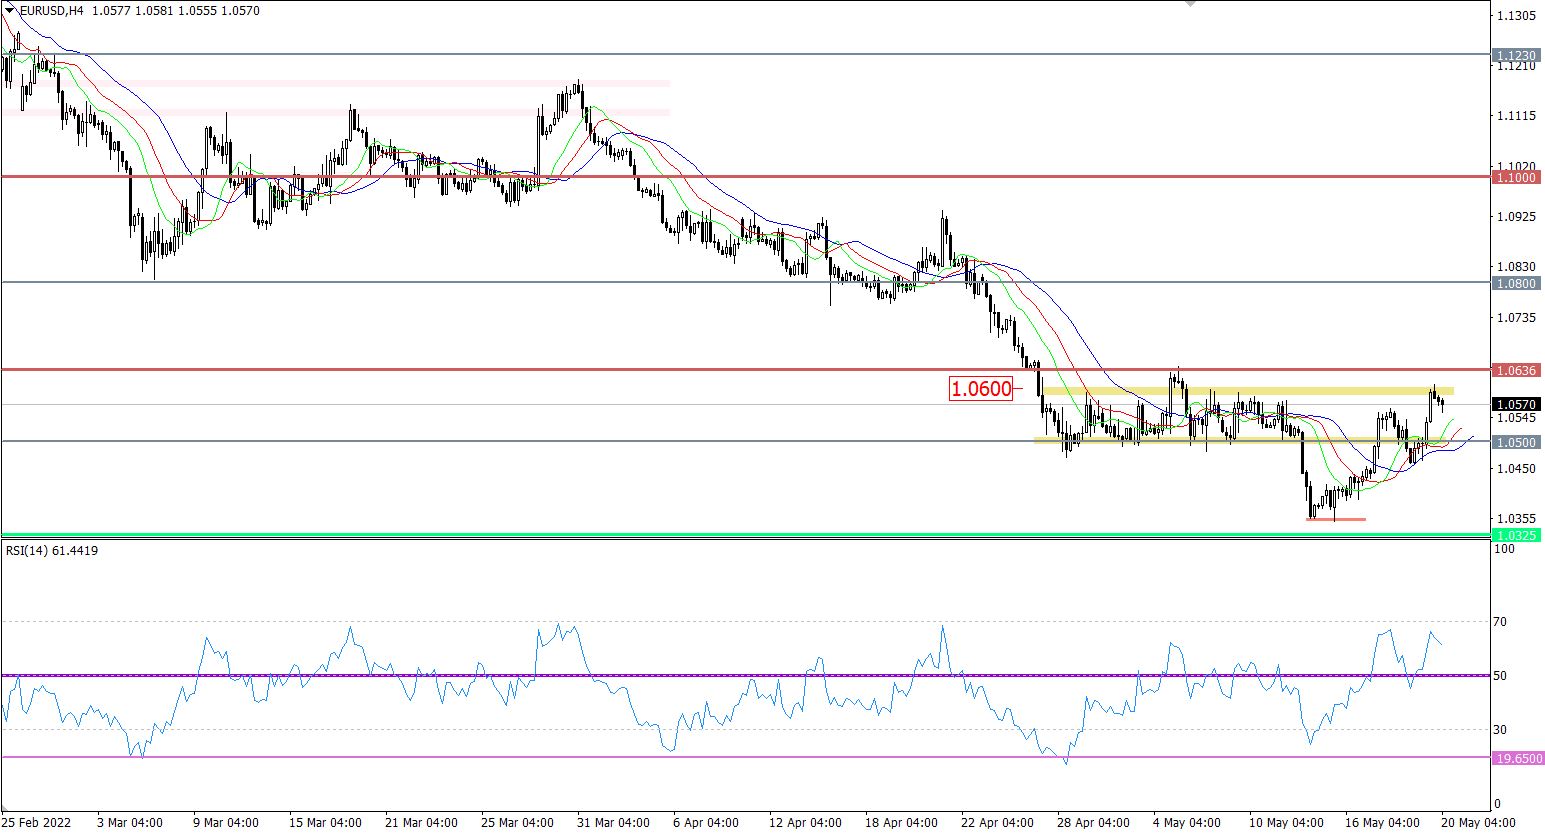 EUR/USD 4-hour price chart.